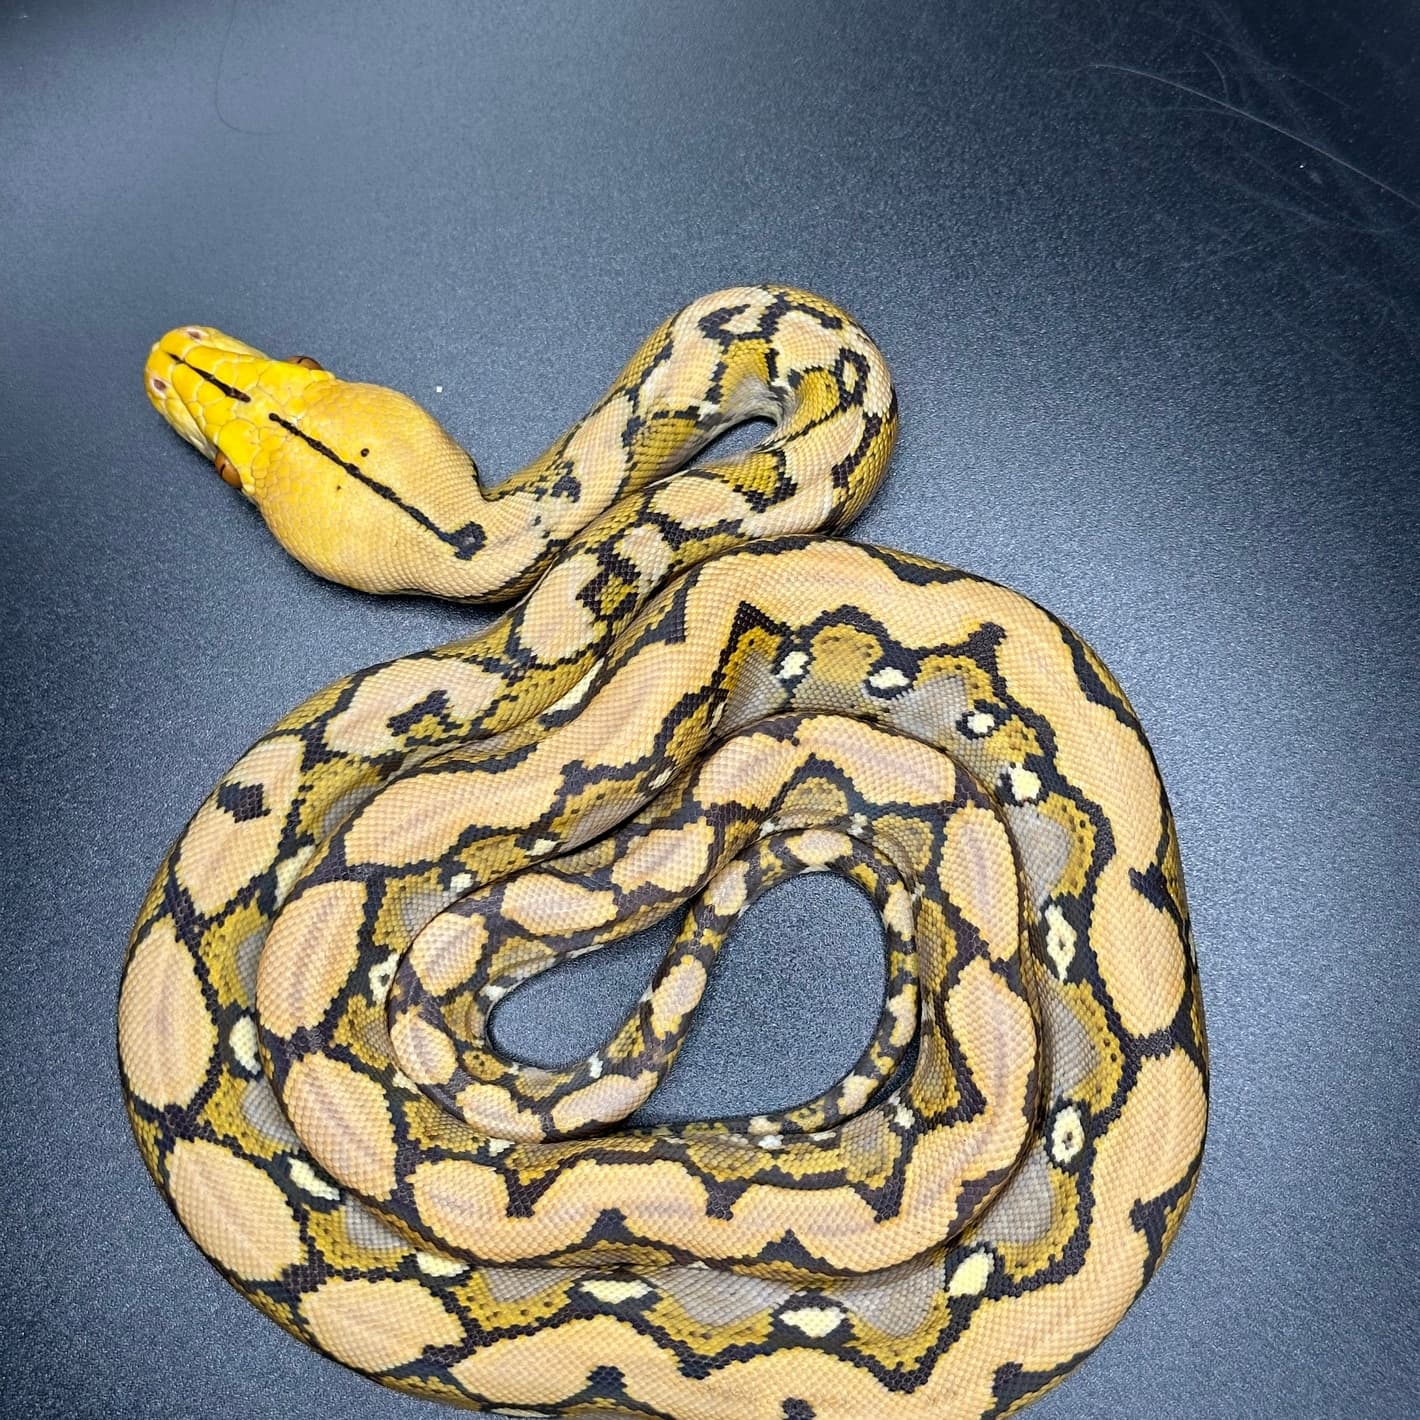 Caramel Albino Reticulated Python by D-Rassic Park